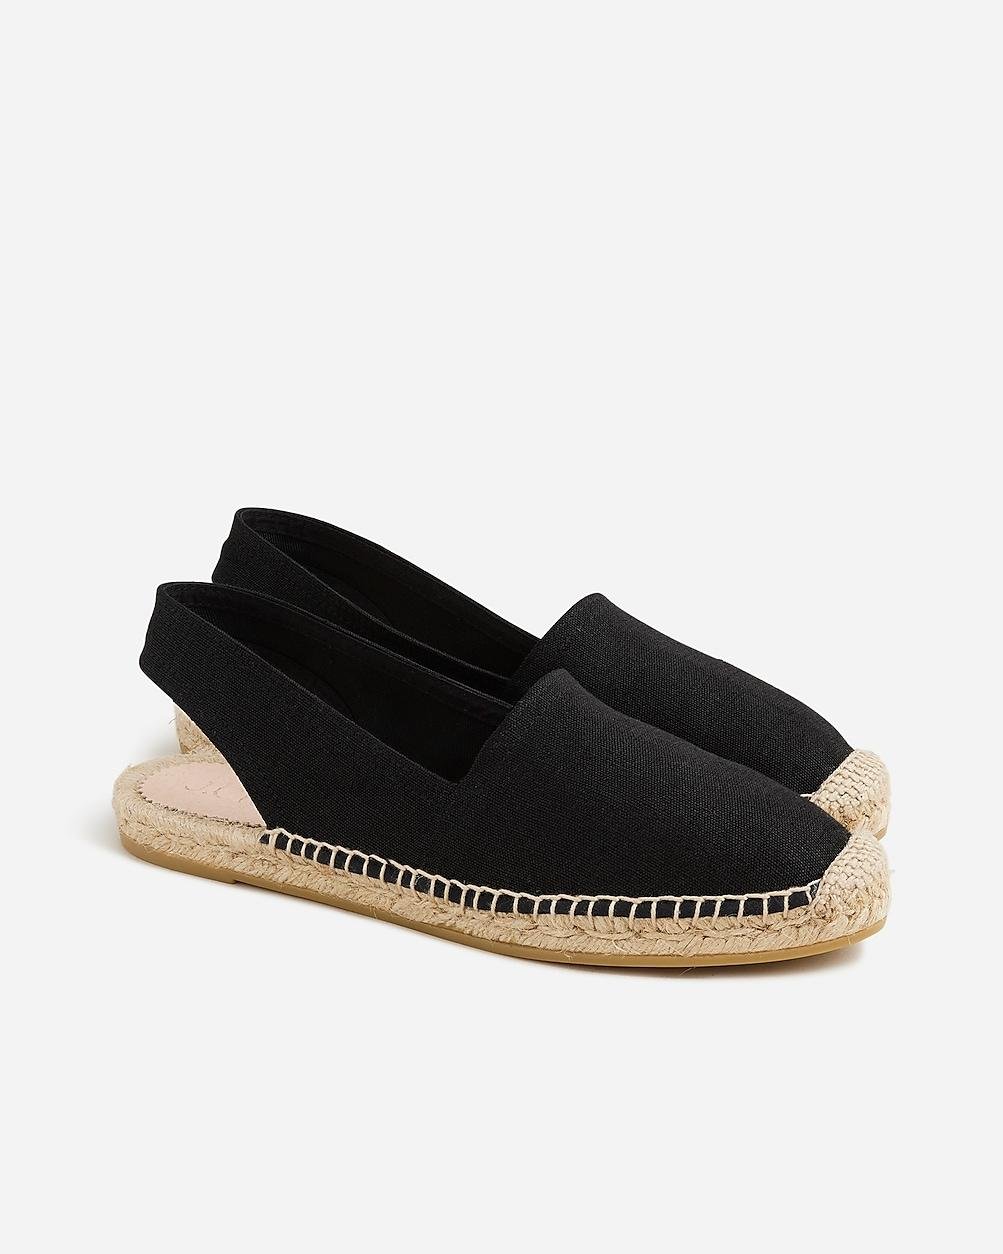 Made-in-Spain slingback espadrilles in canvas by J.CREW